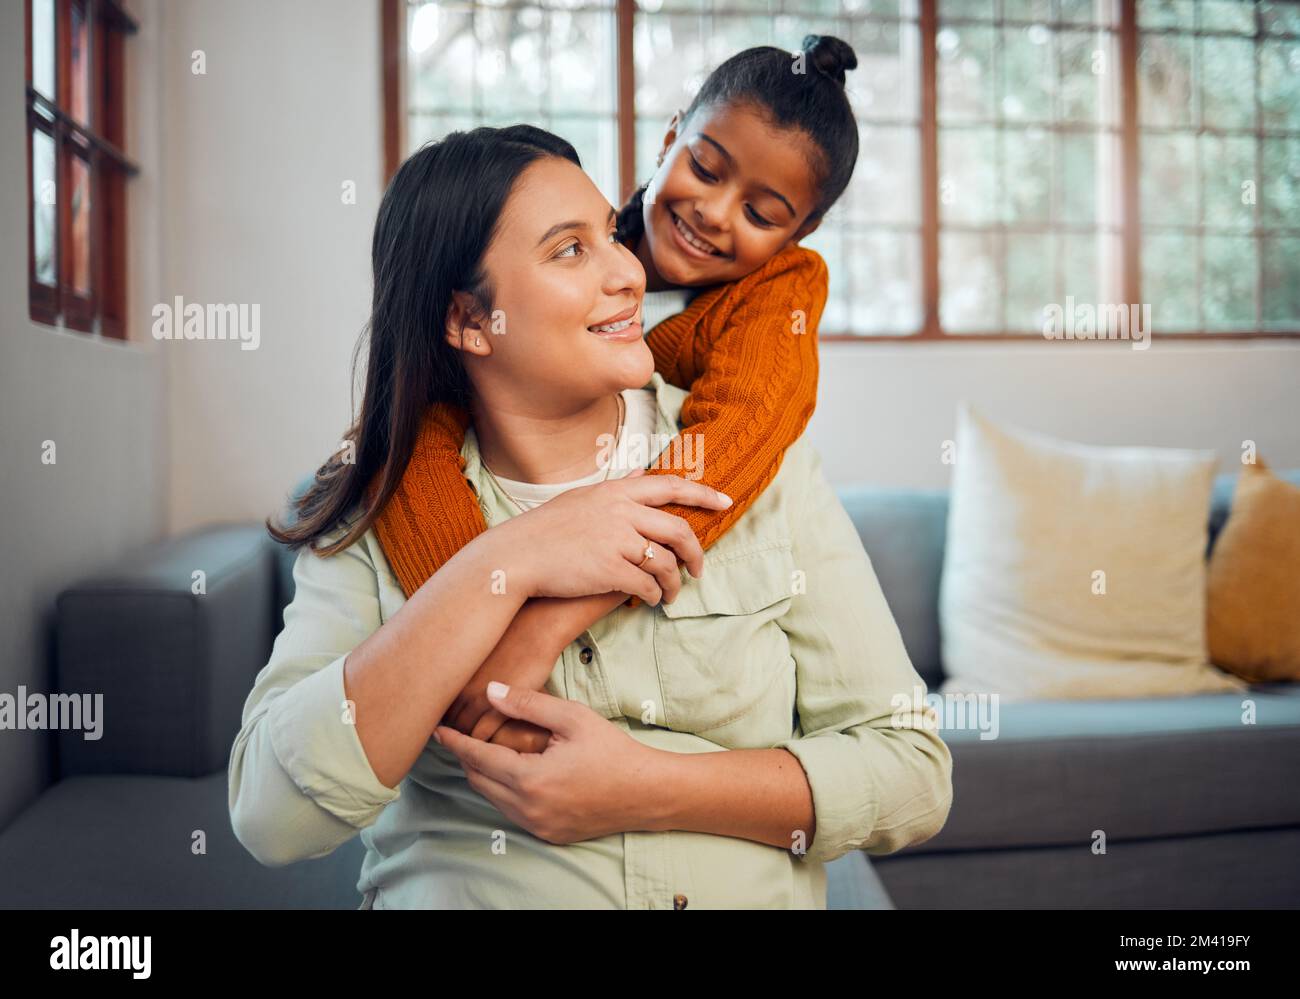 Mom, girl and hug by sofa in living room, family home and happy together for love, bonding and care. Happiness, mother and daughter with embrace Stock Photo